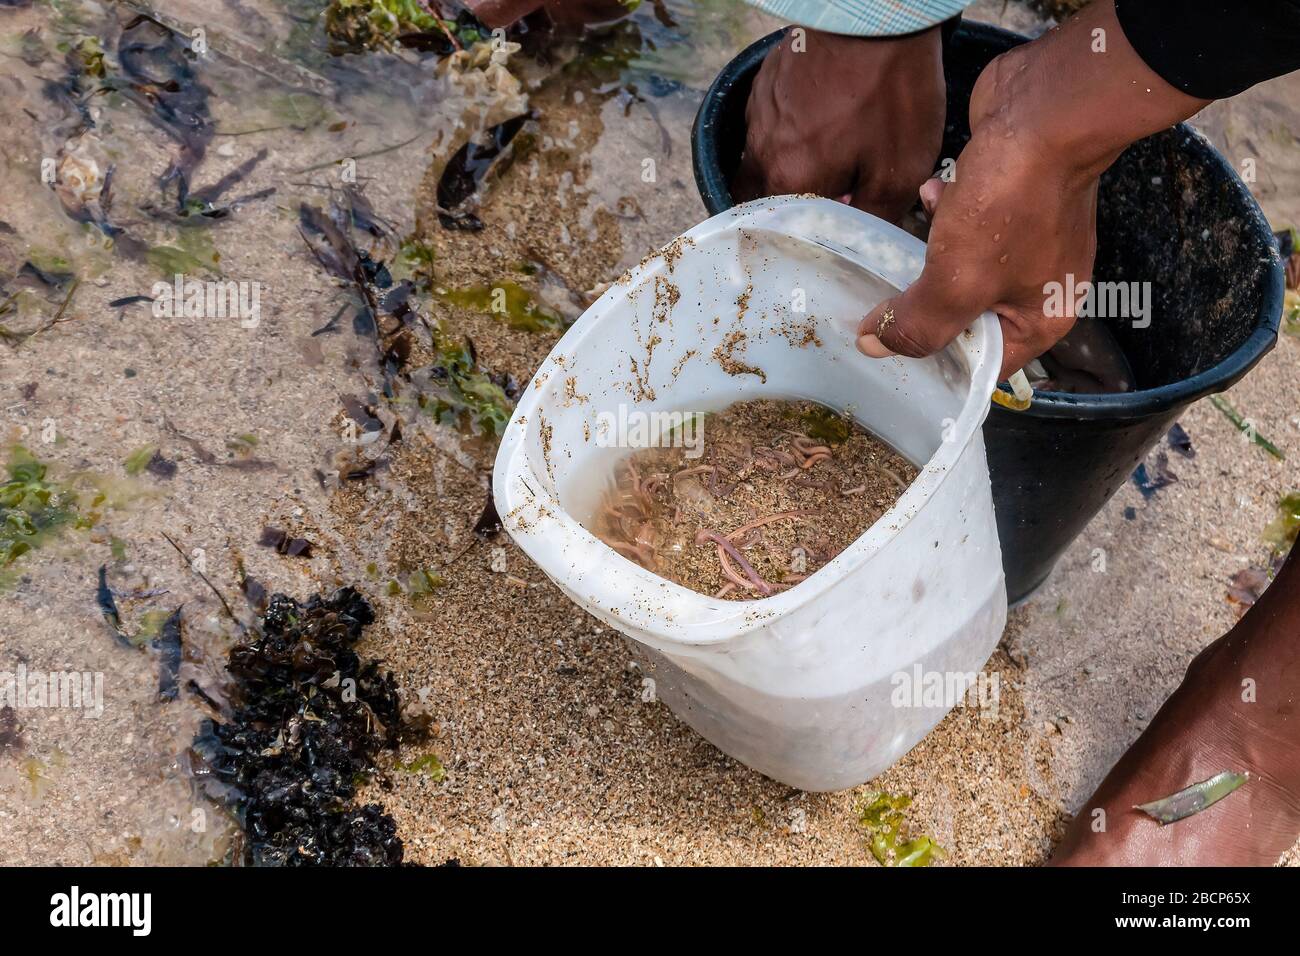 Marine invertebrates being collected by a man in the sand on a beach. Bali, Indonesia Stock Photo